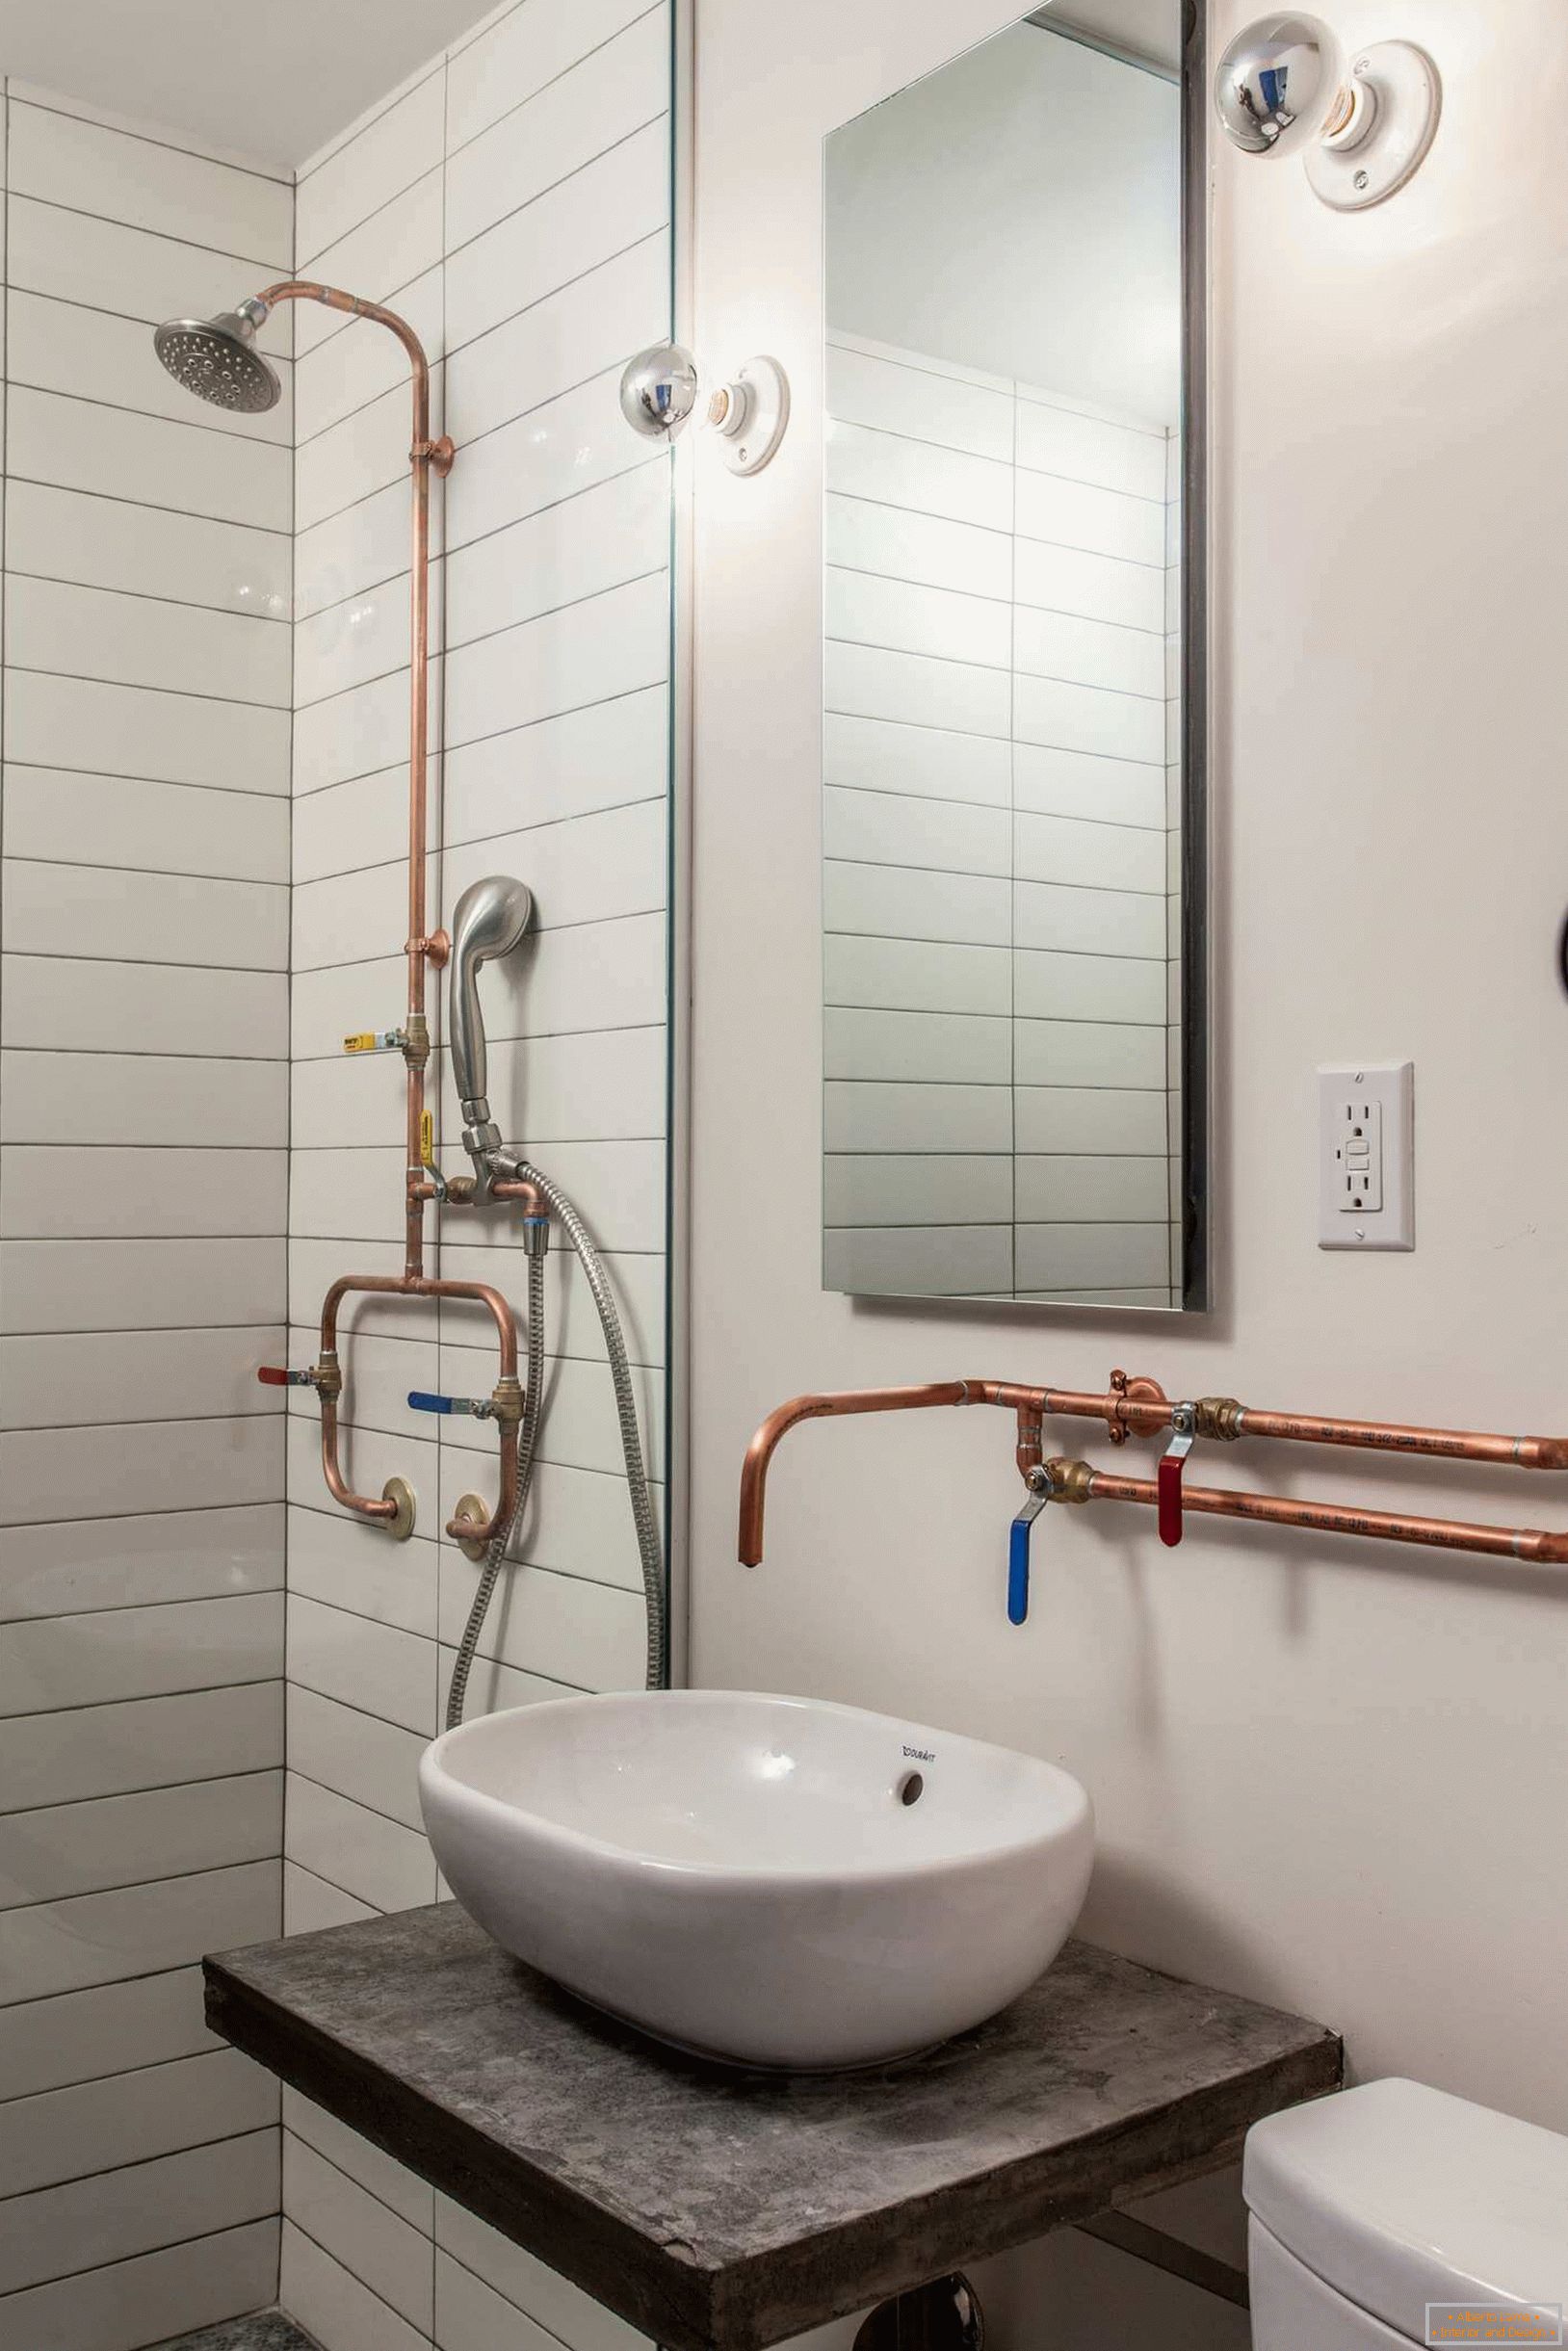 Copper faucets in the bathroom